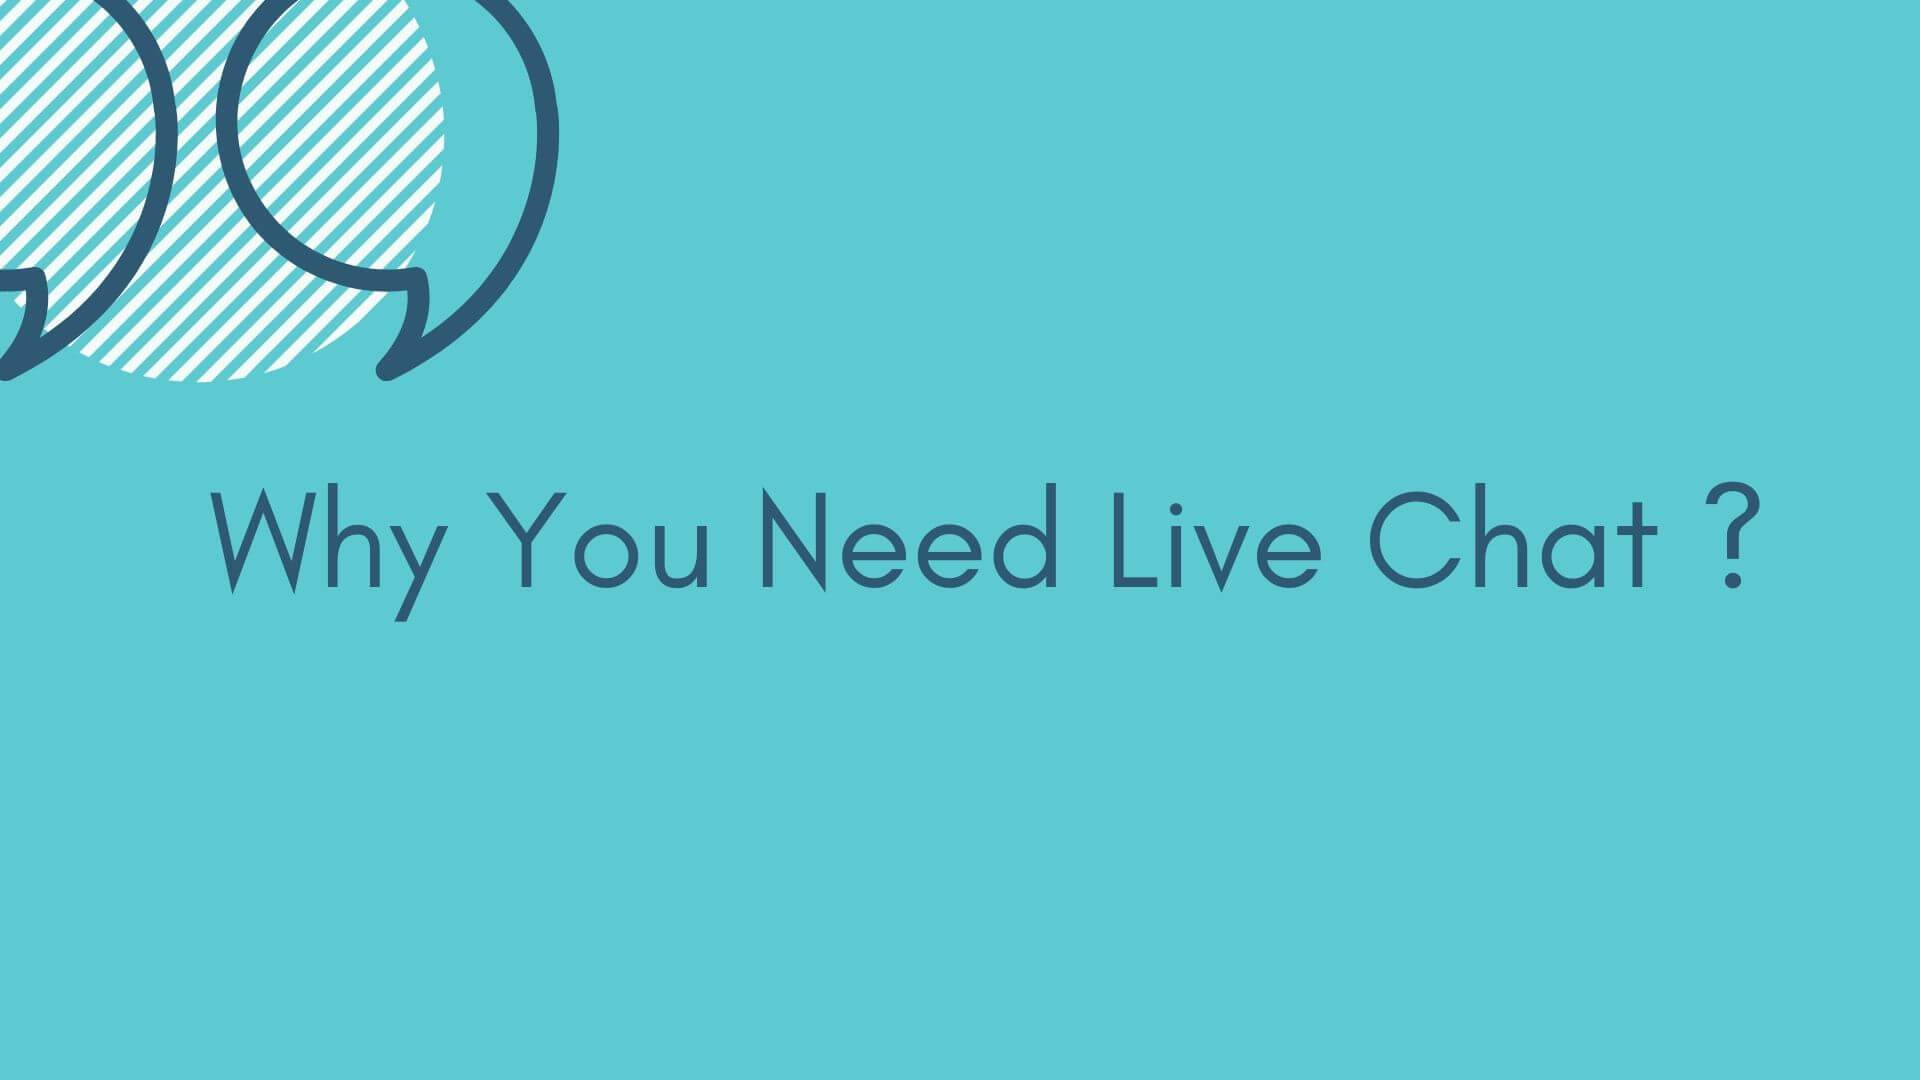 Why You Need Live Chat